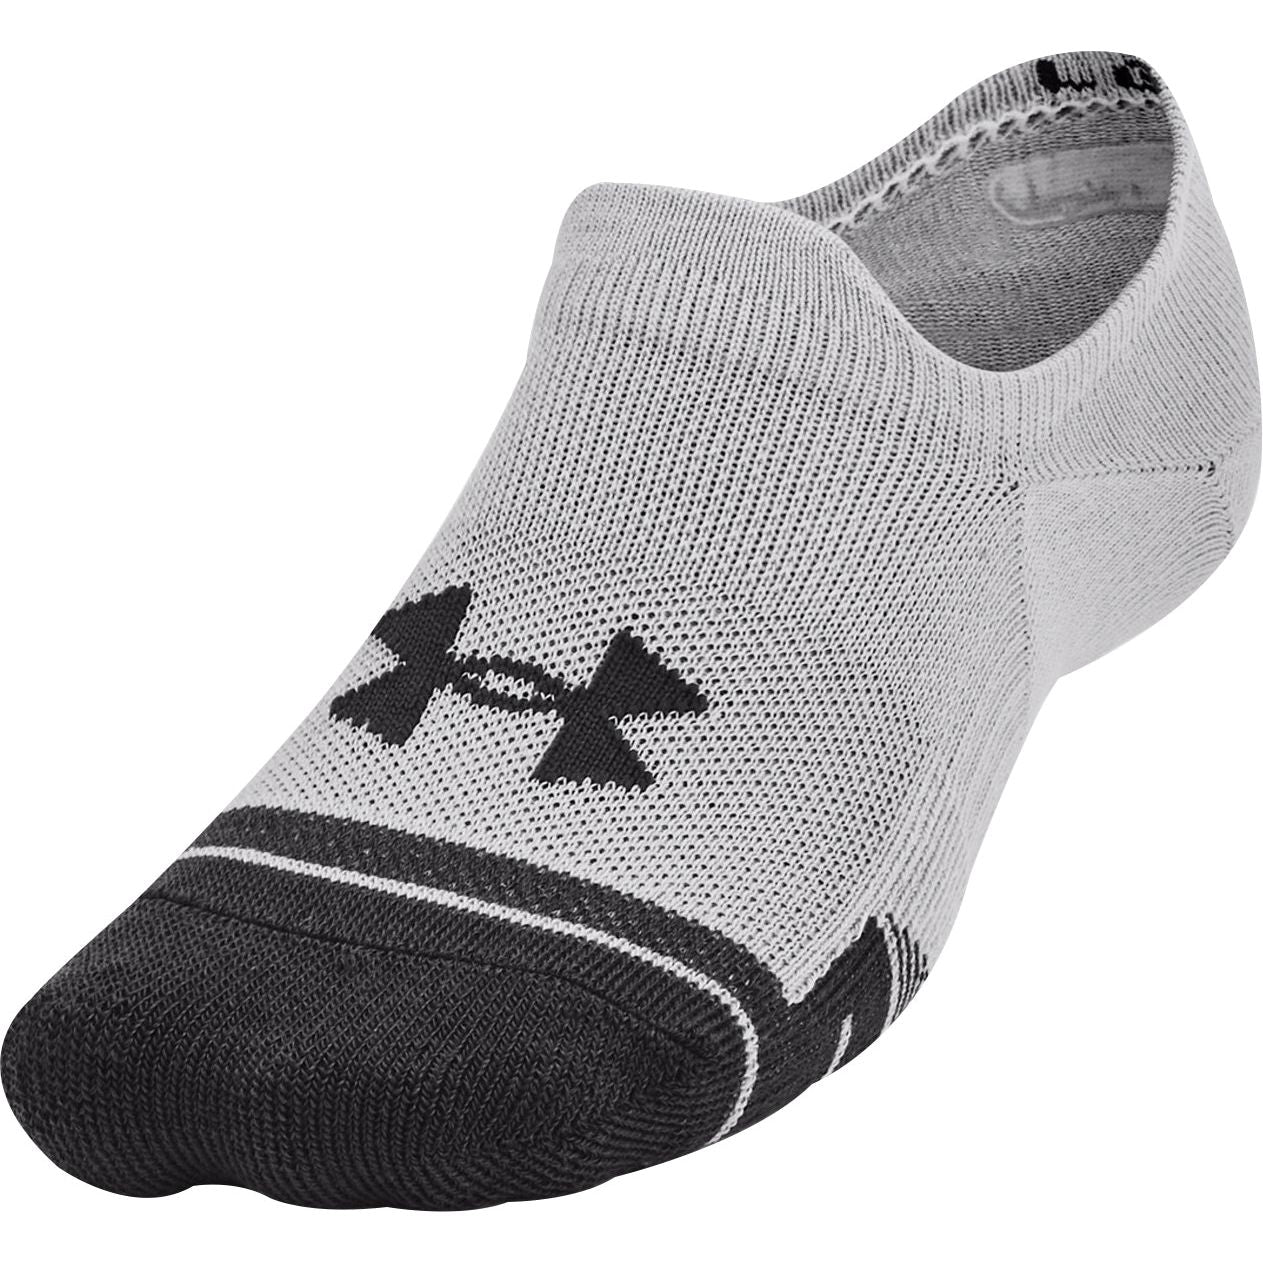 Under Armour Performance Tech Pack Ultra Low Tab Socks Front - Front View